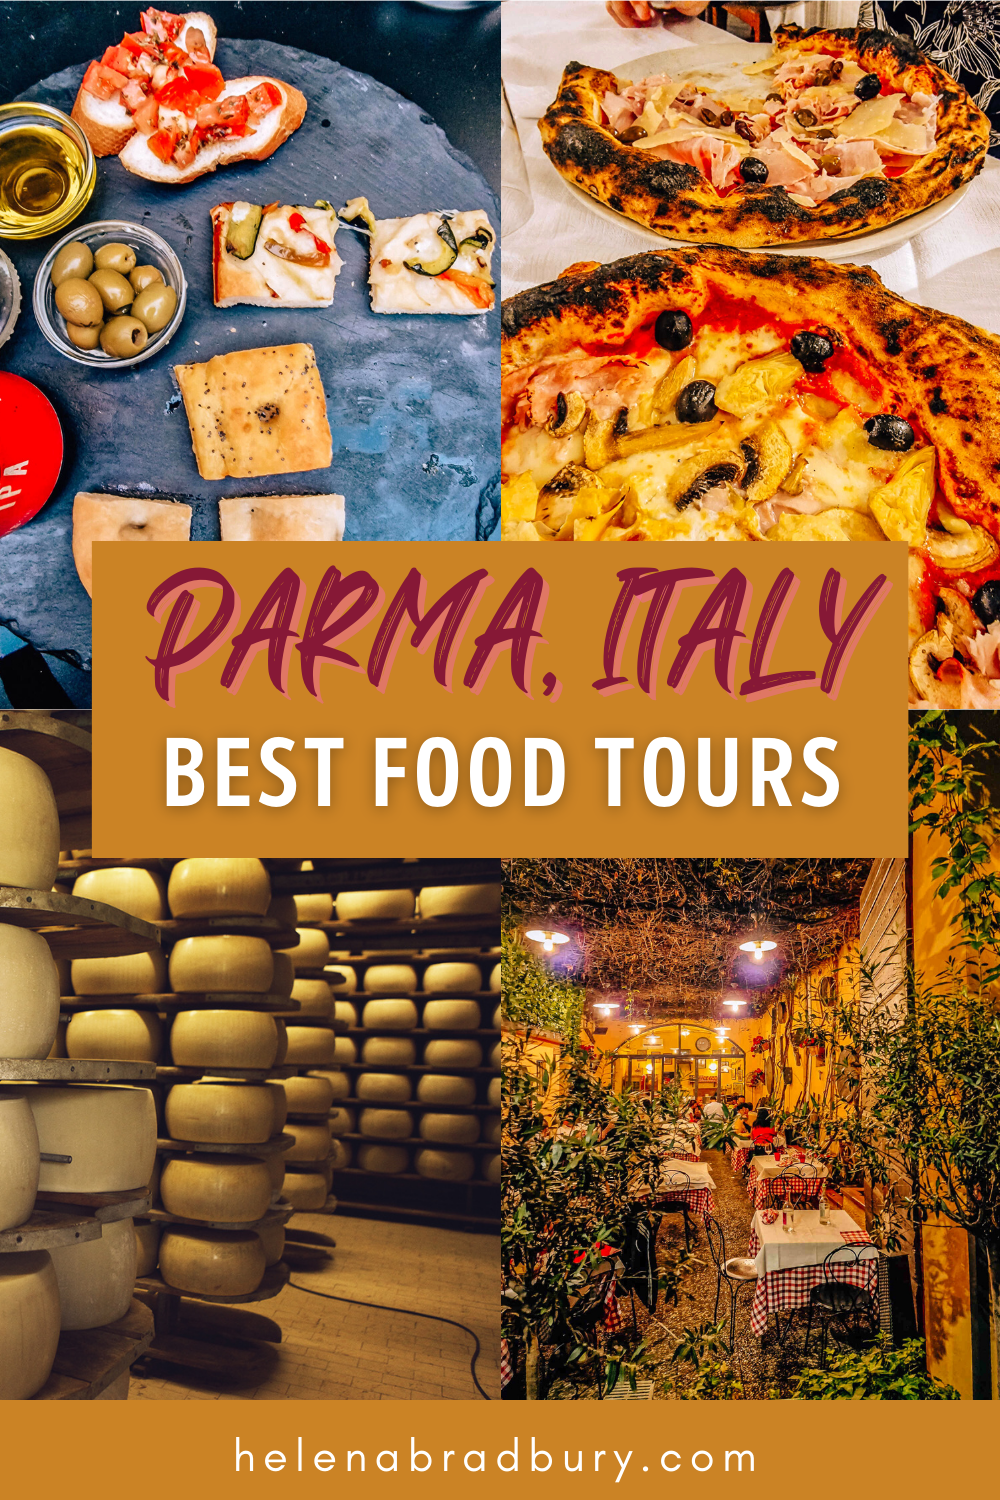 Food in Parma, Italy is world-famous. Don’t miss the chance to experience a Parma food tour and discover the local foodie delights in Parma, Italy.| parma food tours | parma italy food | things to do in parma italy | what to do in parma italy | parma